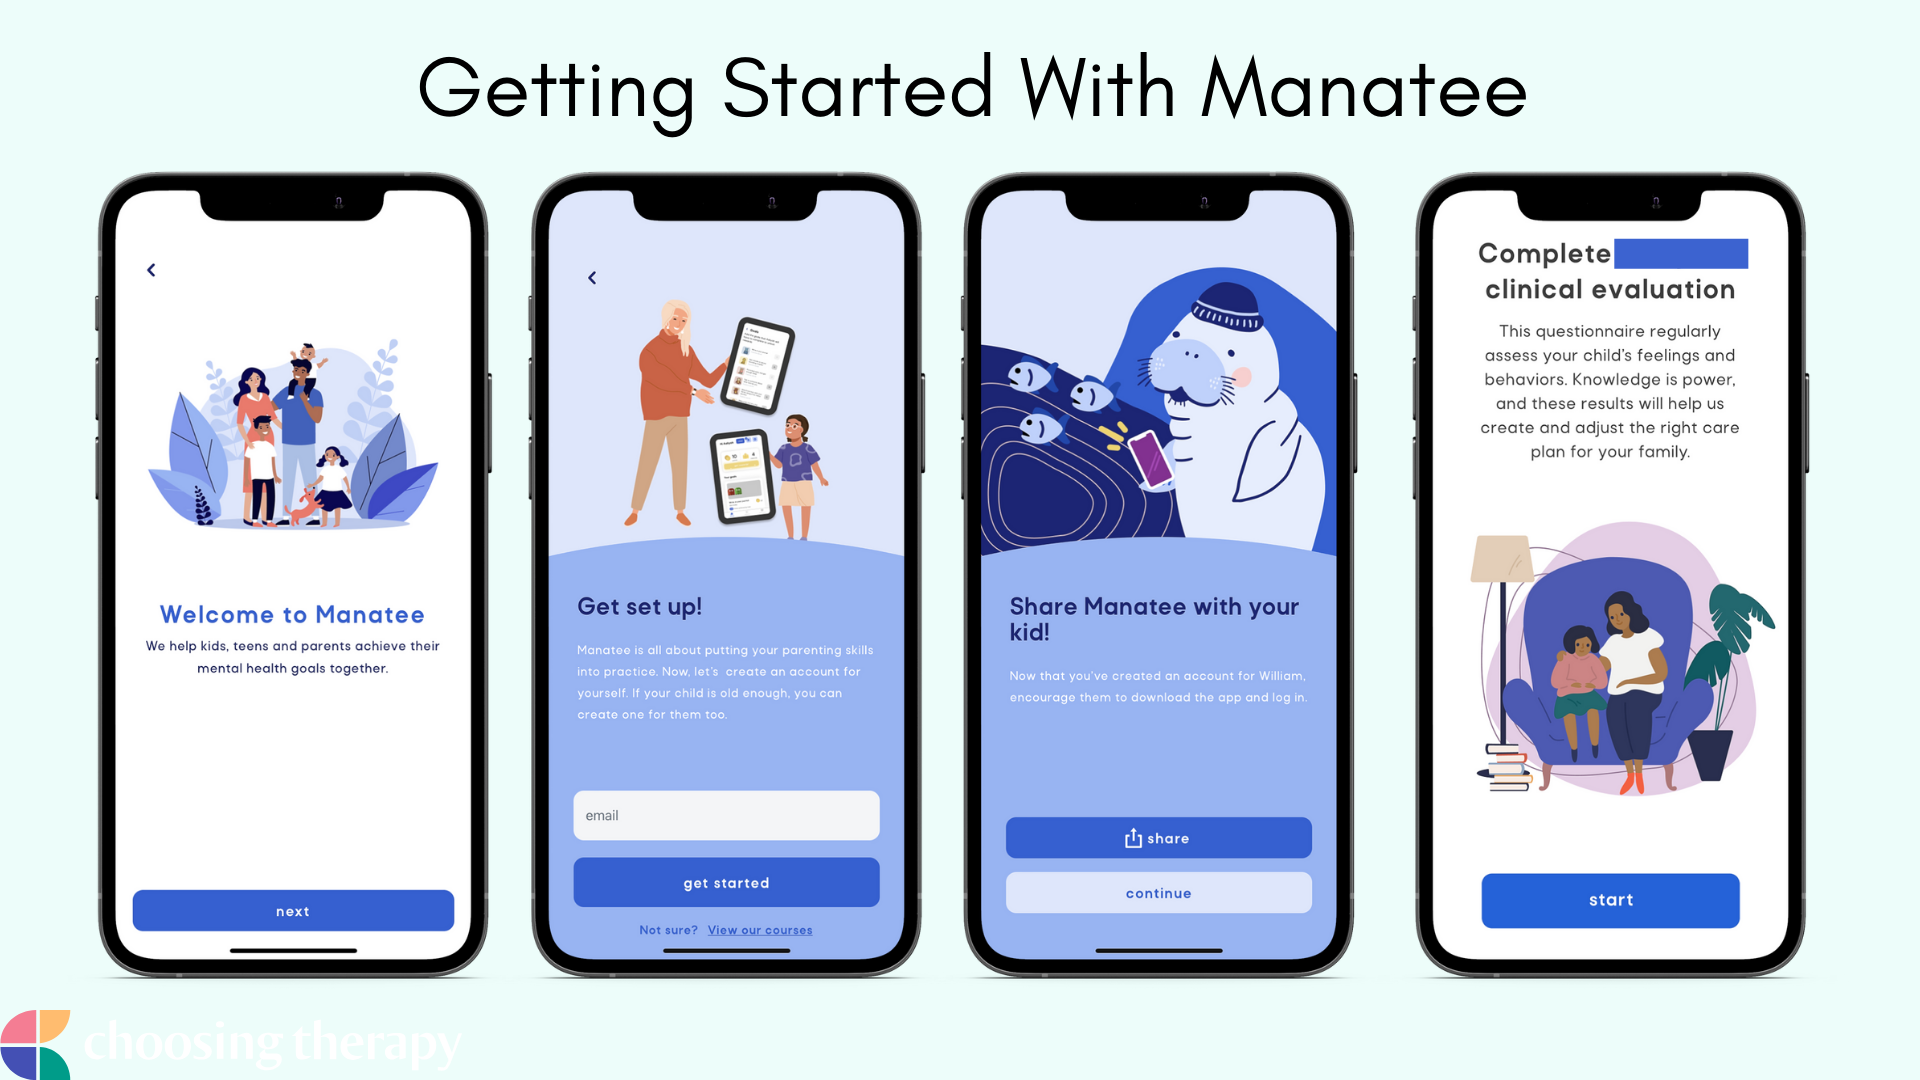 Image of getting started with care in the Manatee app